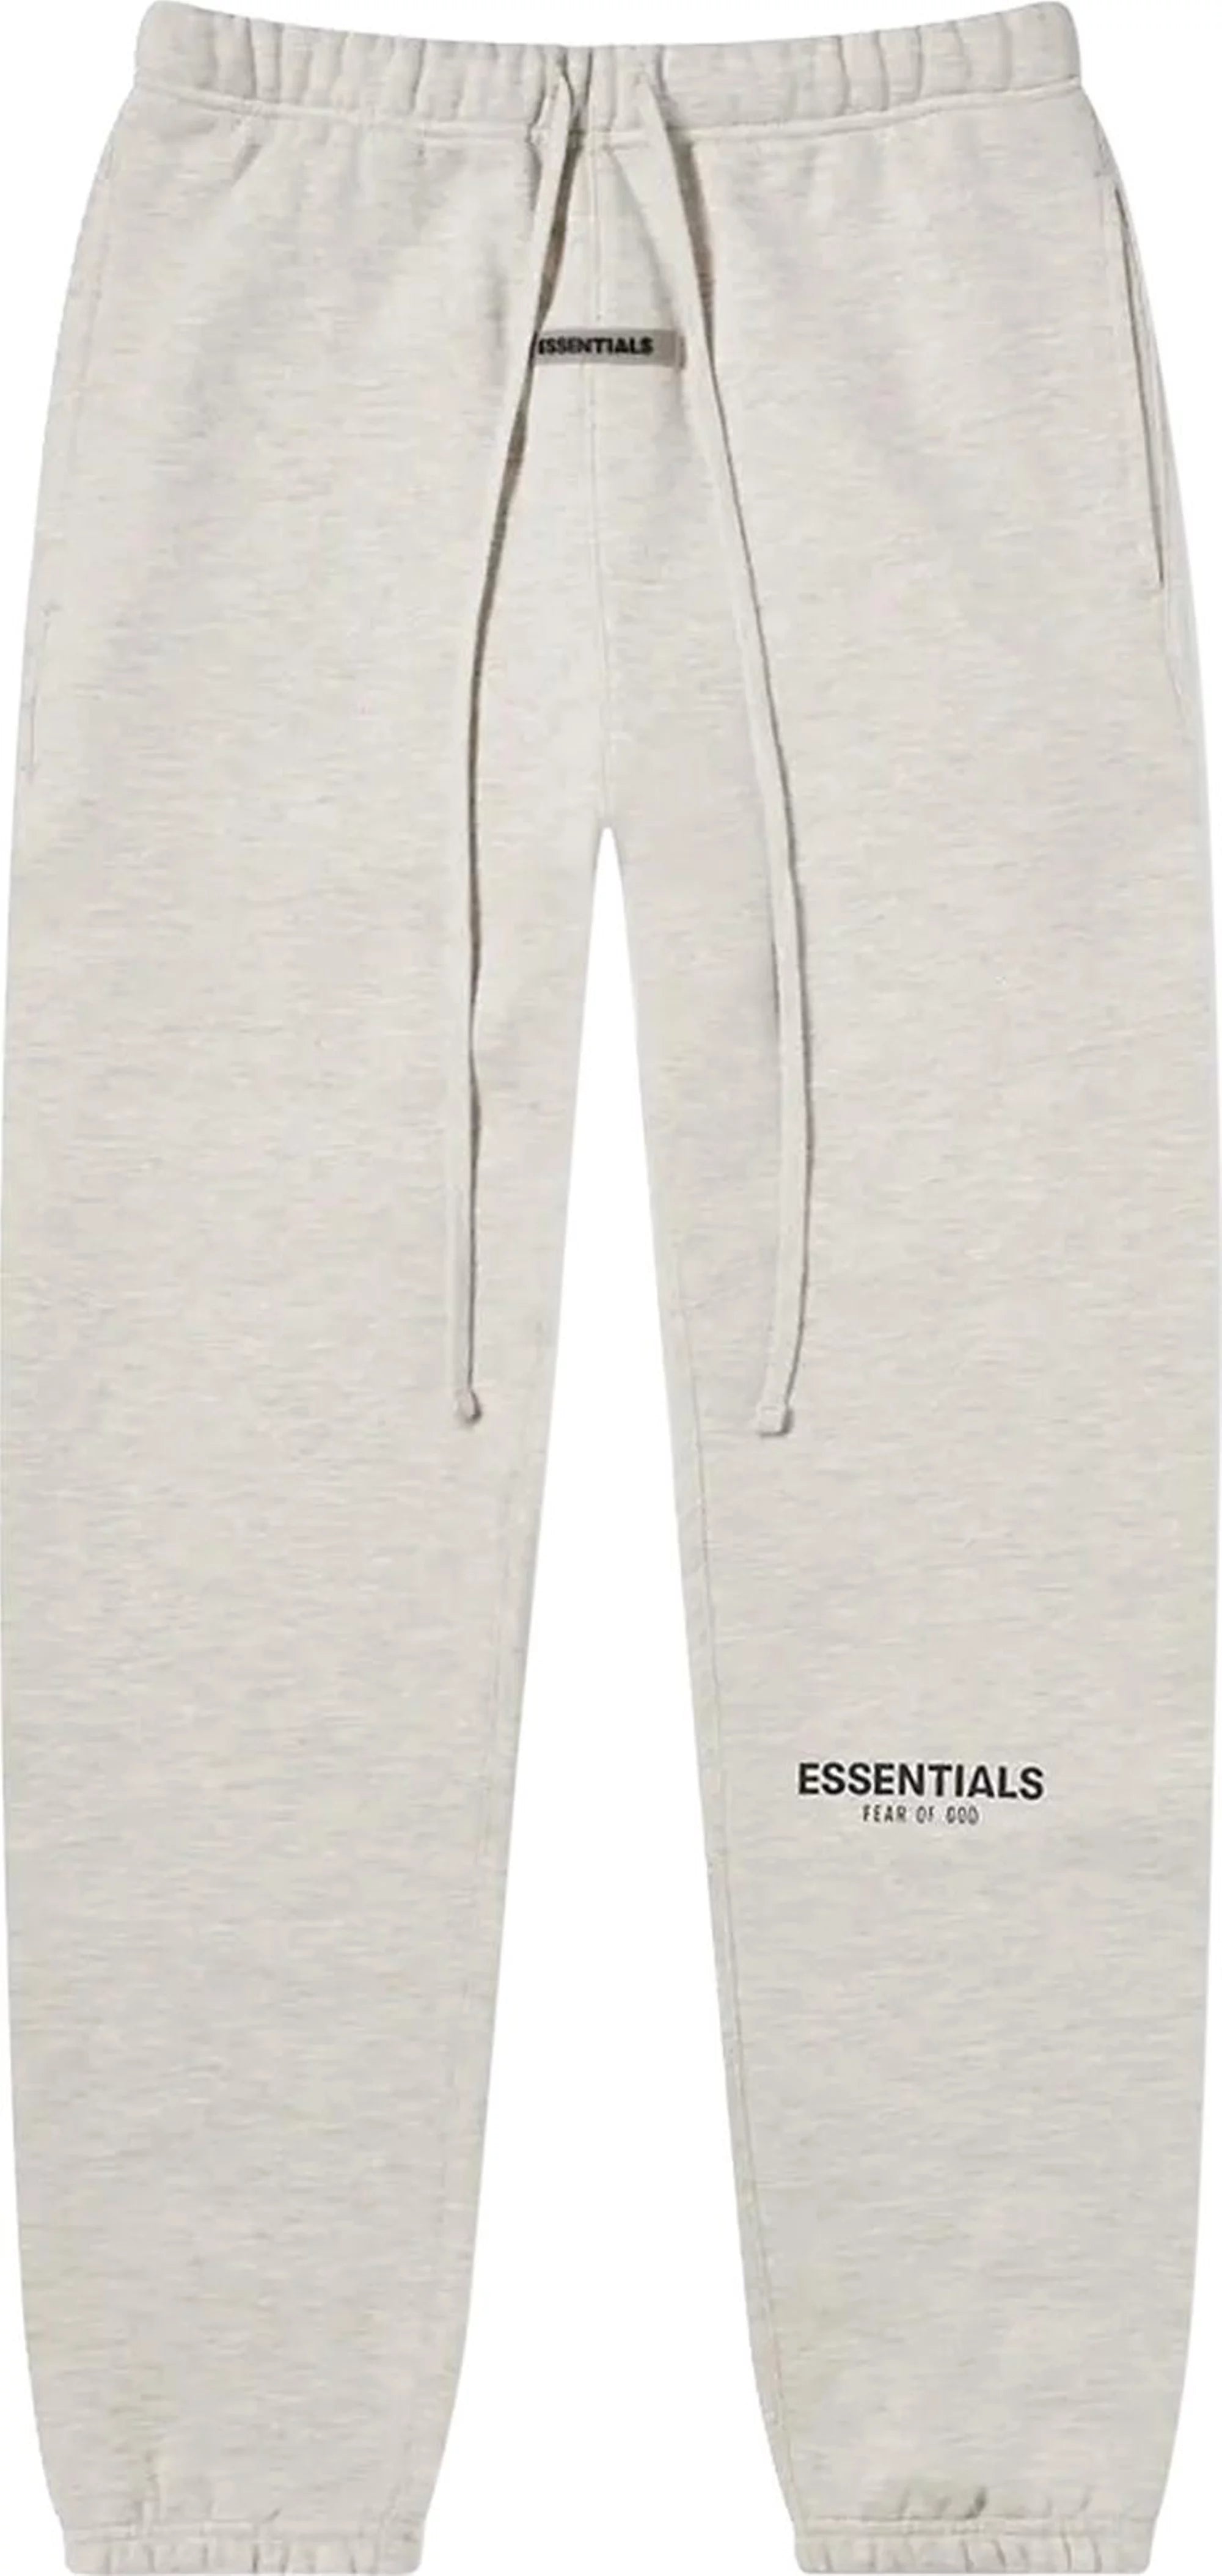 Fear of God Essentials Core Collection Sweatpant Light Heather Oatmeal